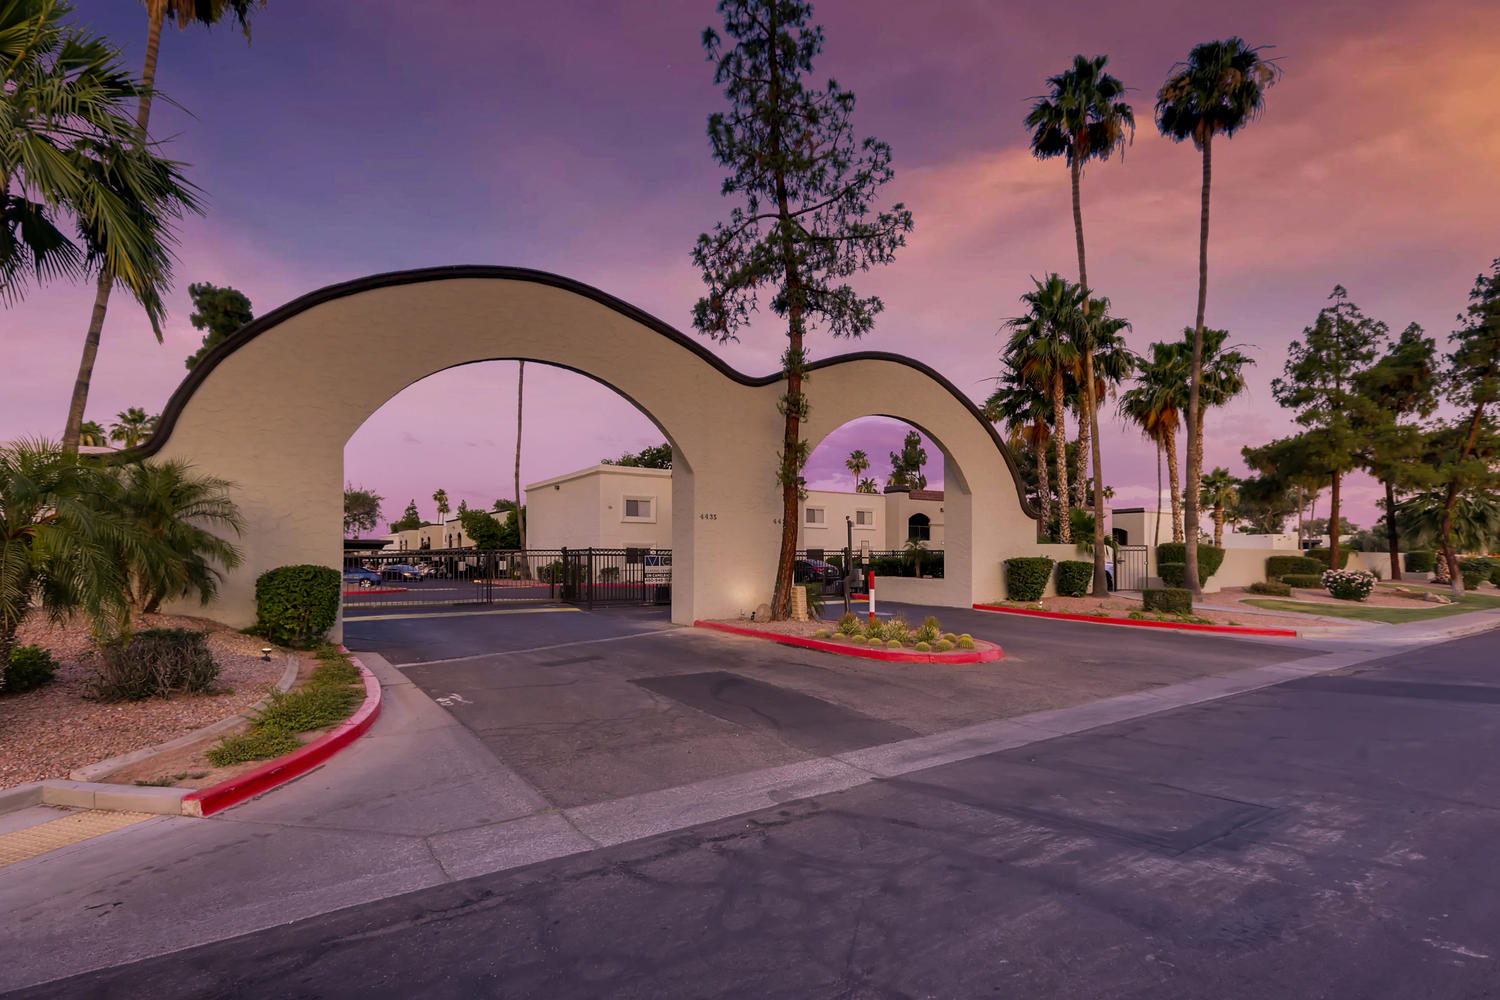 Entrance to the Complex with arches and palm trees